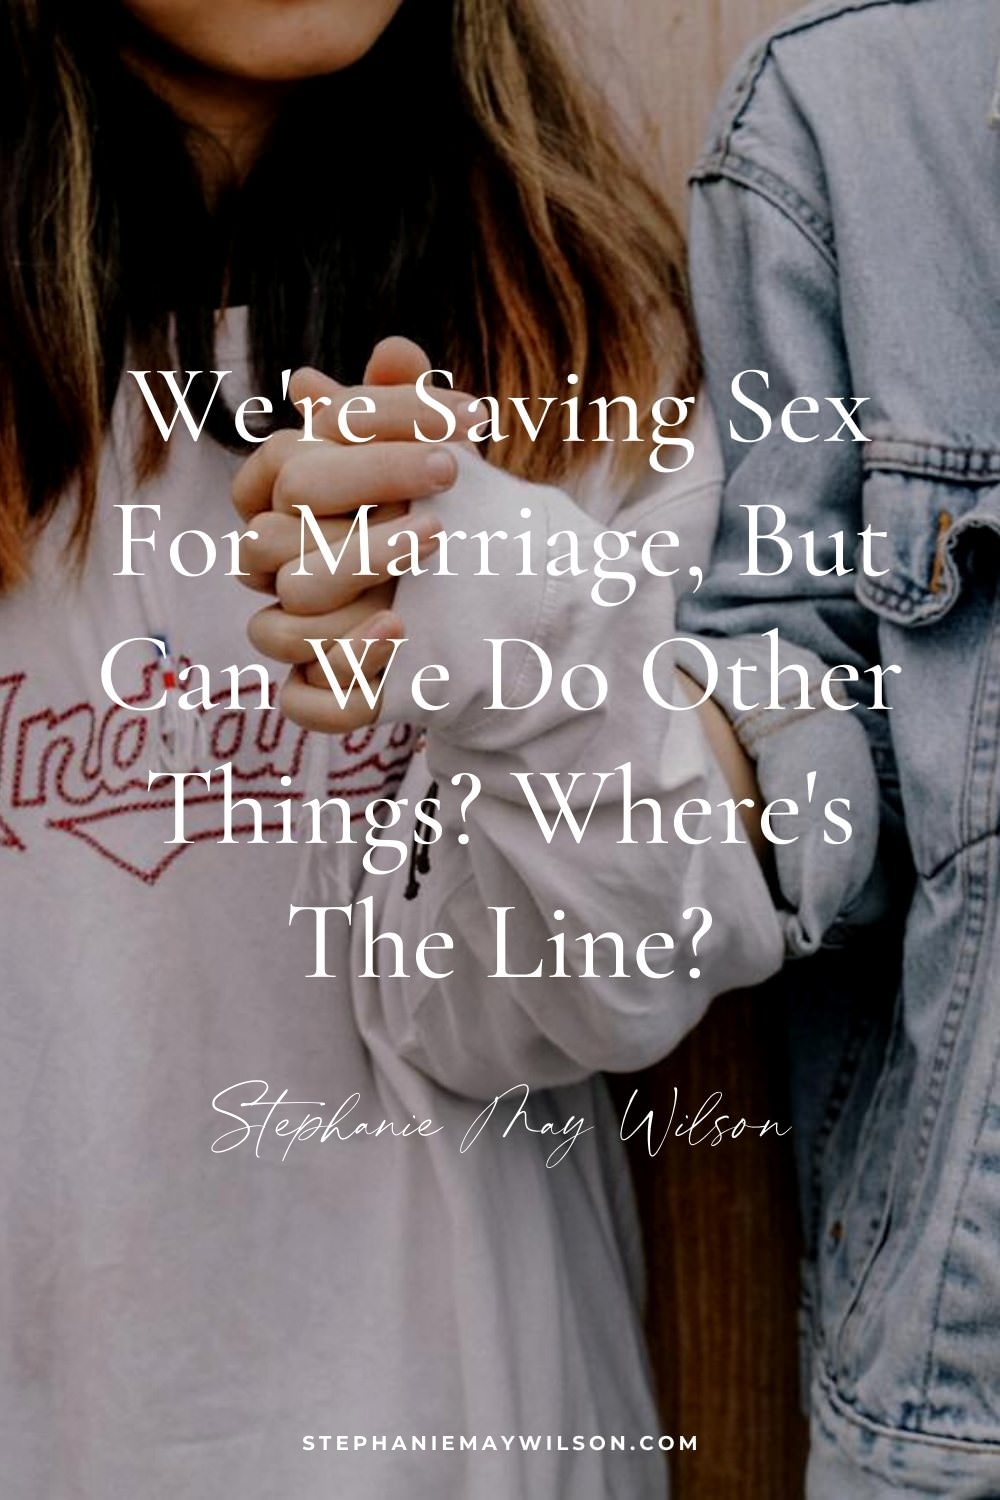 We Re Saving Sex For Marriage But Can We Do Other Things